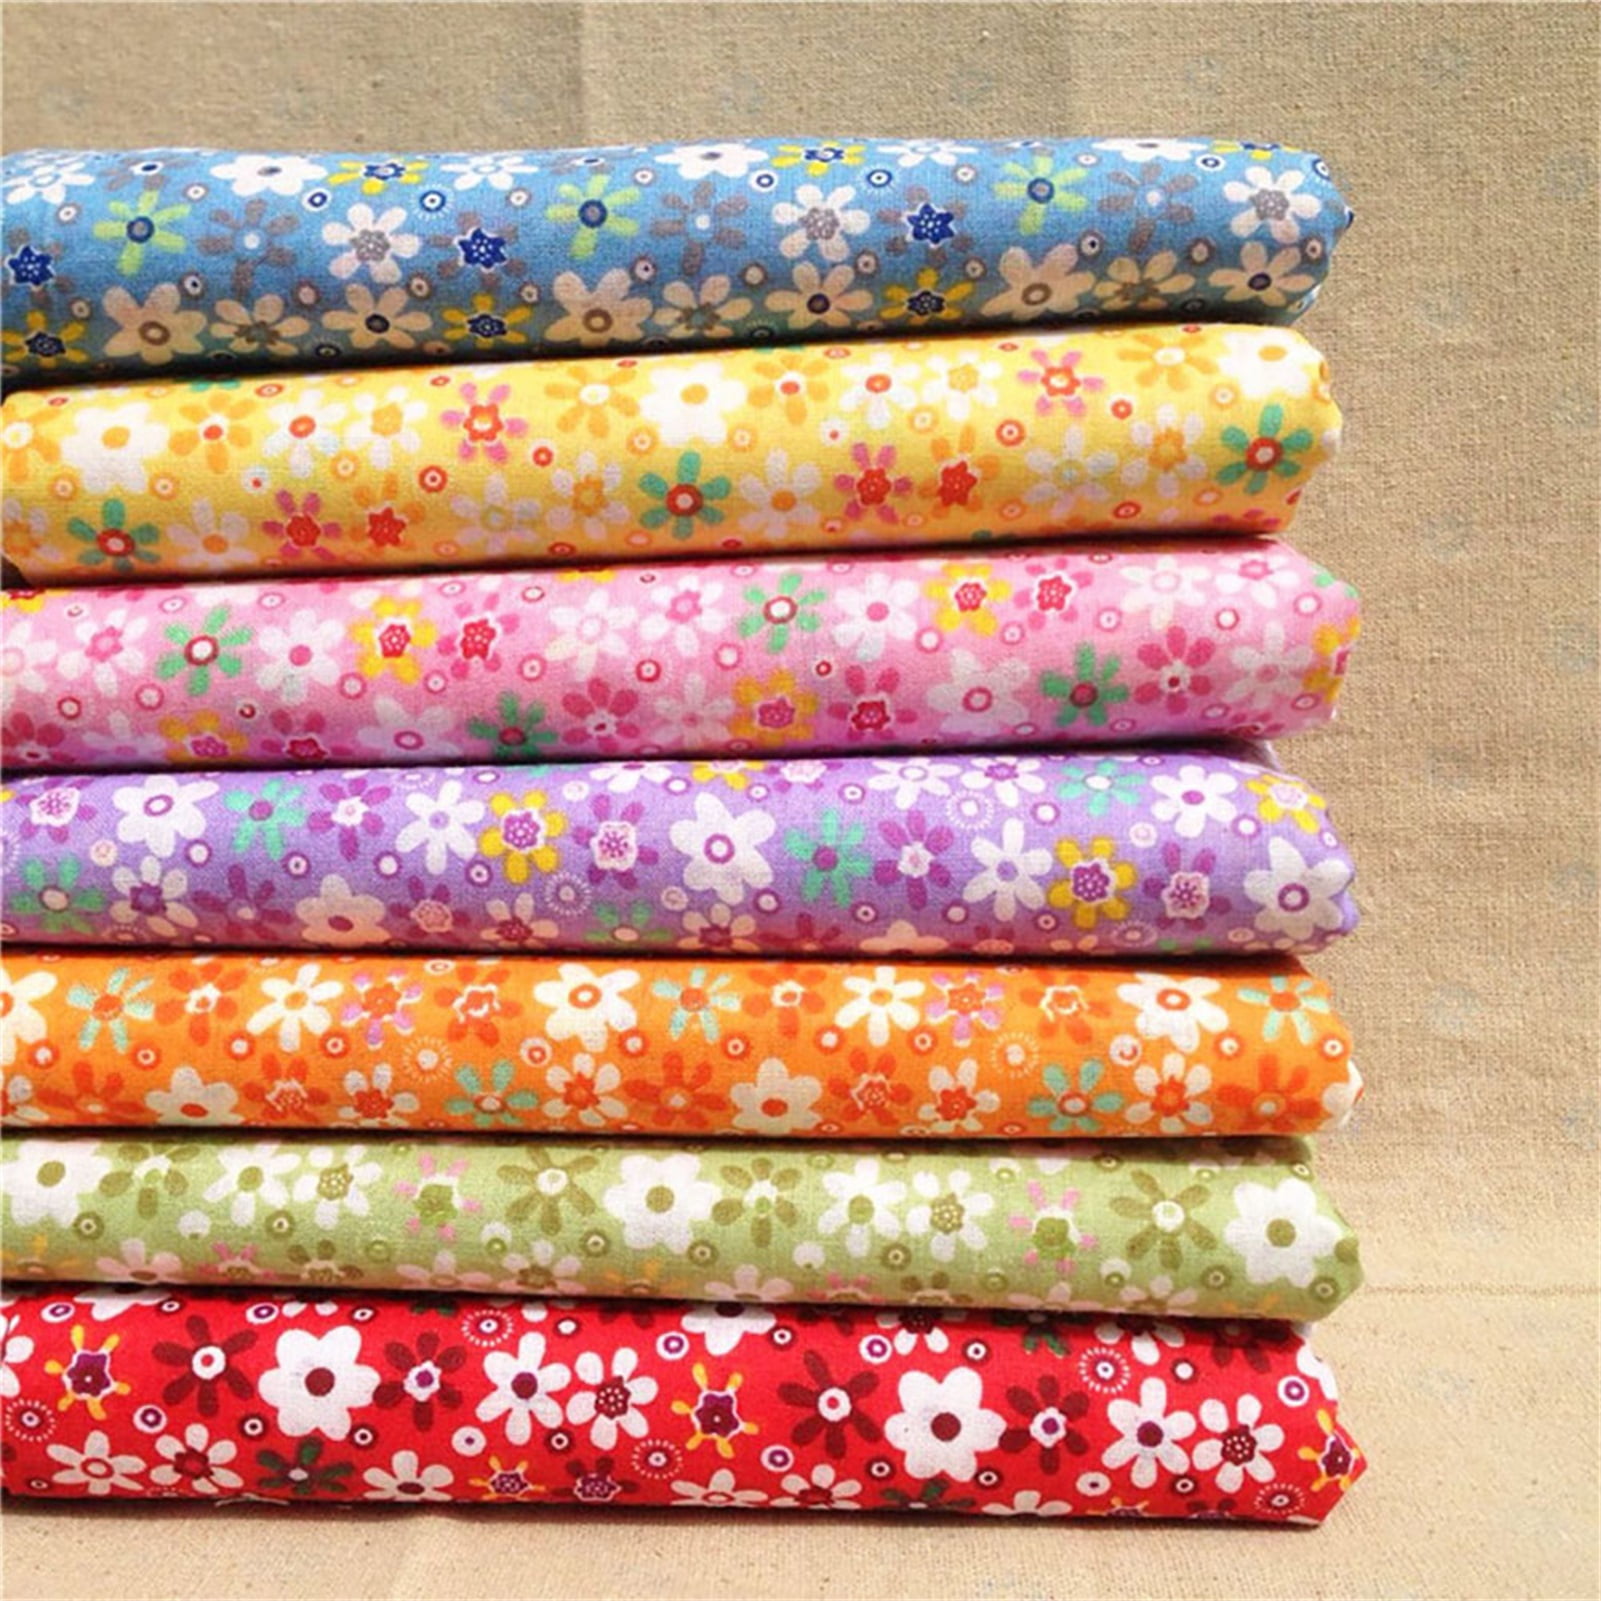 30 Pcs Quilting Fabric by The Yard,Cotton Fabric Bundles Patchwork for  Dressmaking Clothes,Material for Sewing Crafting